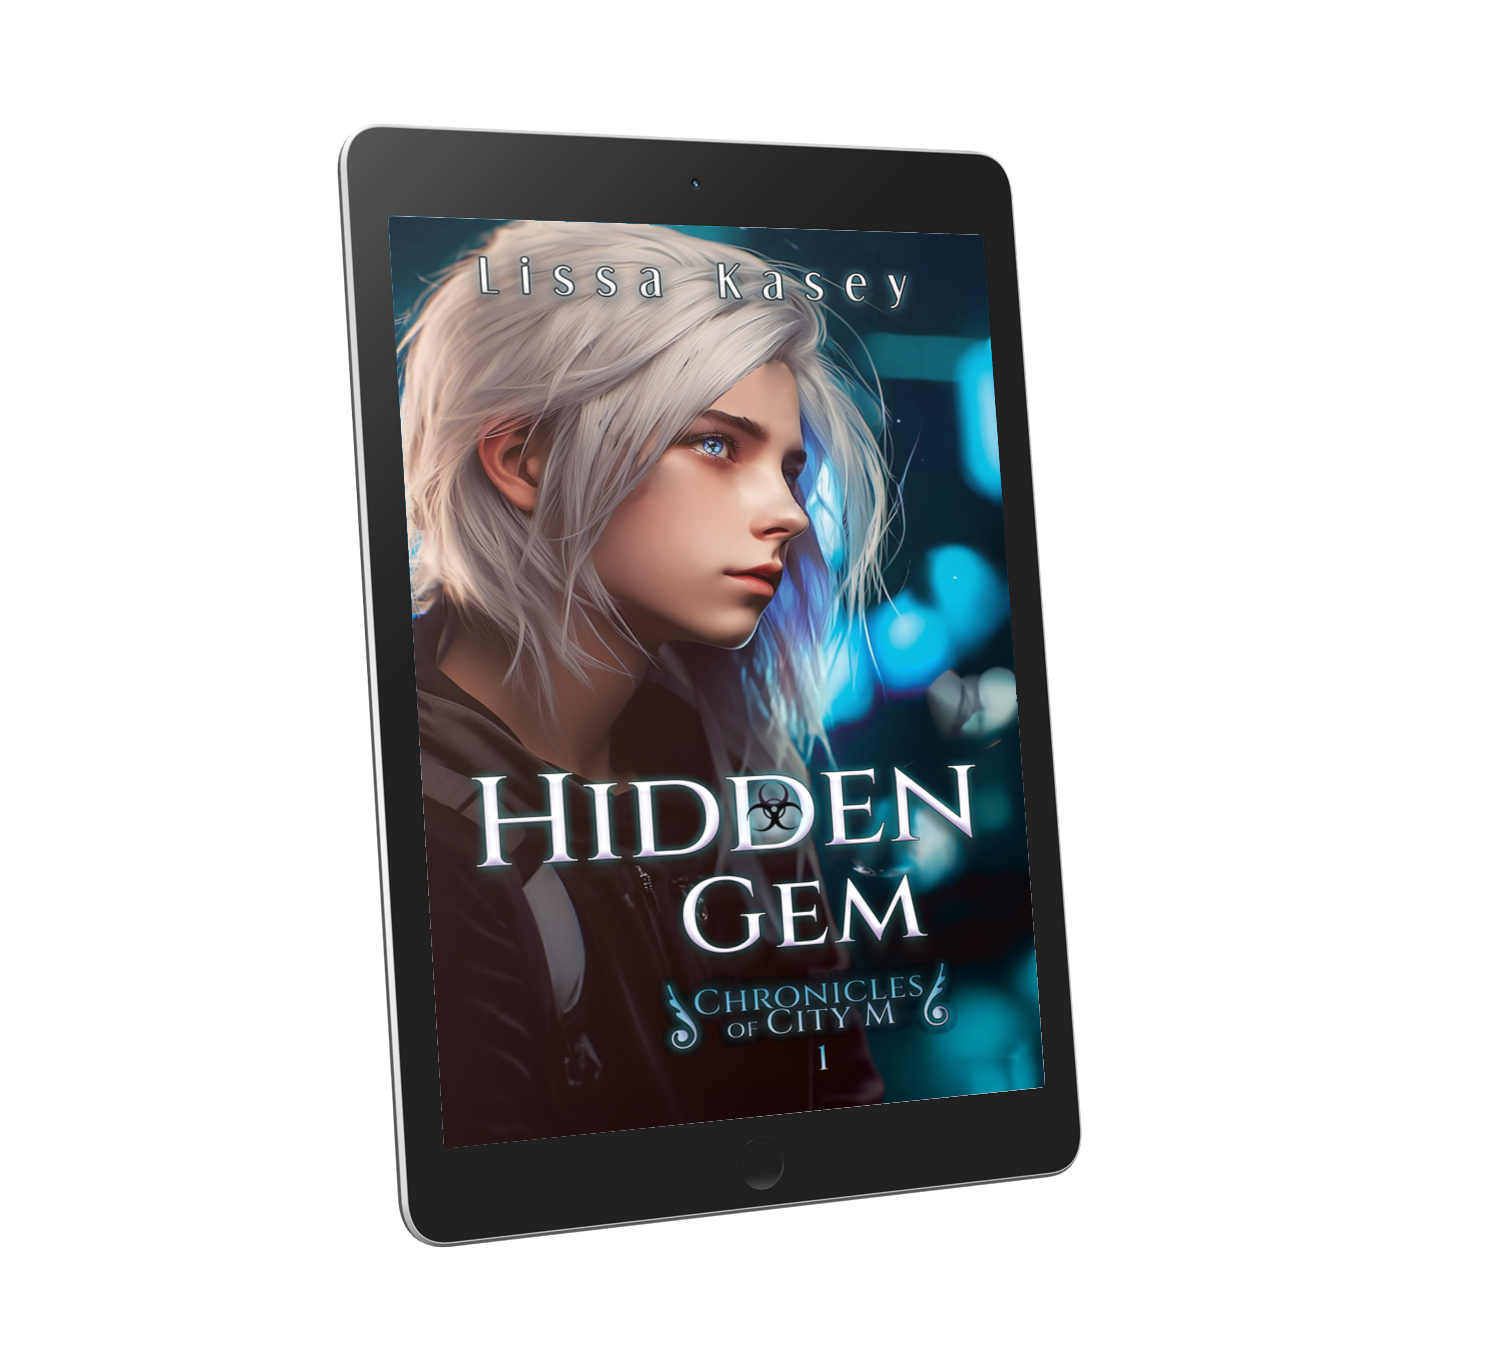 Hidden Gem Chronicle of City M by Lissa Kasey Book One